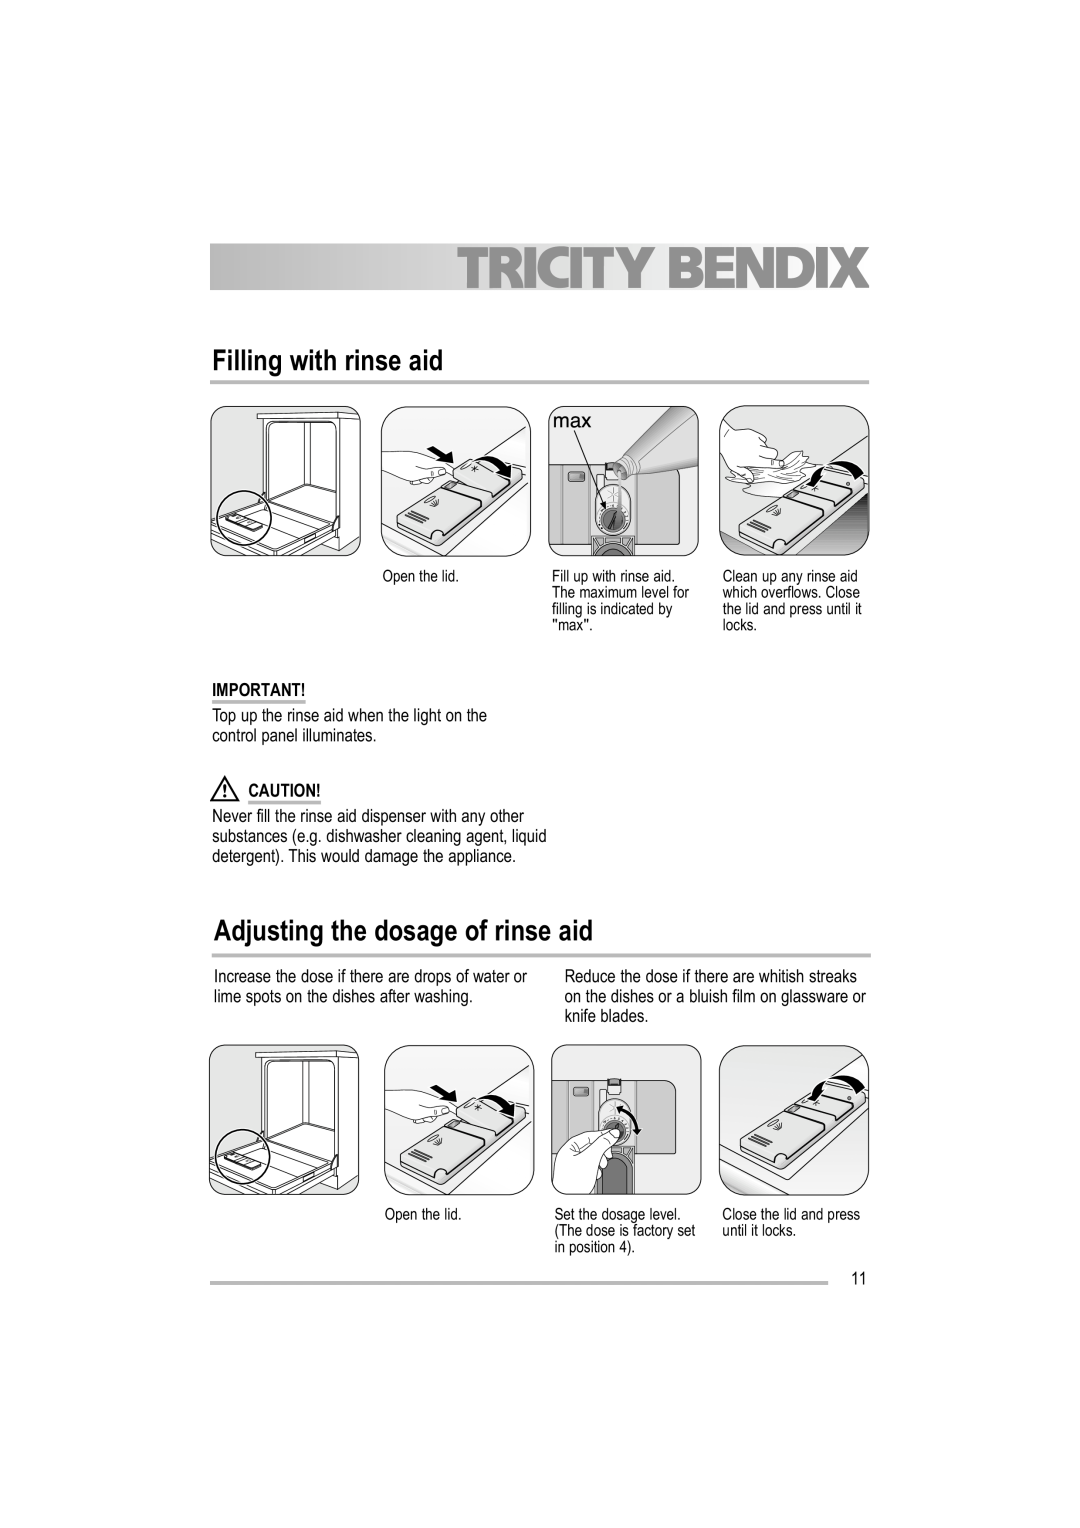 Tricity Bendix TDF 221 manual Filling with rinse aid, Adjusting the dosage of rinse aid 